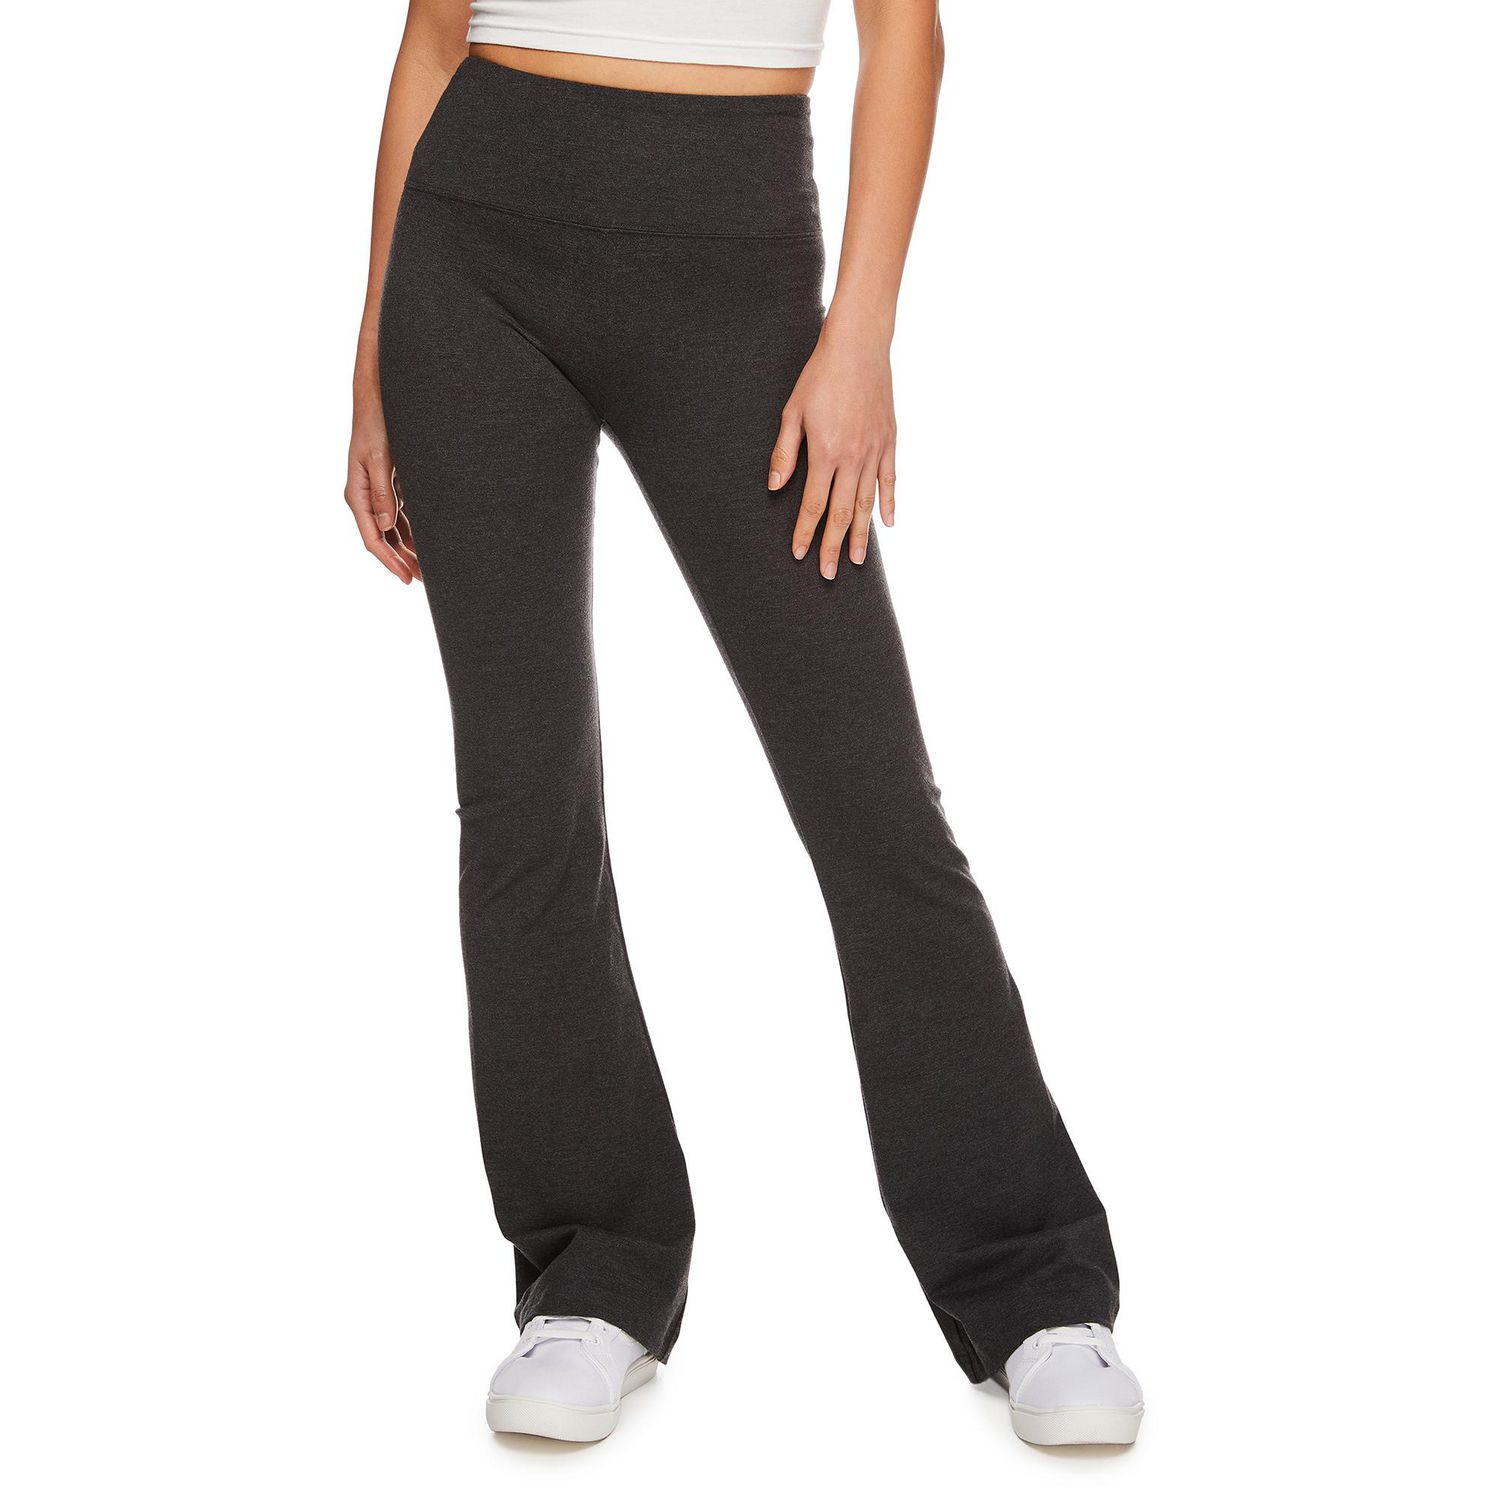 Women's High-Waisted Ribbed Flare Leggings - Wild Fable™ Black XS 